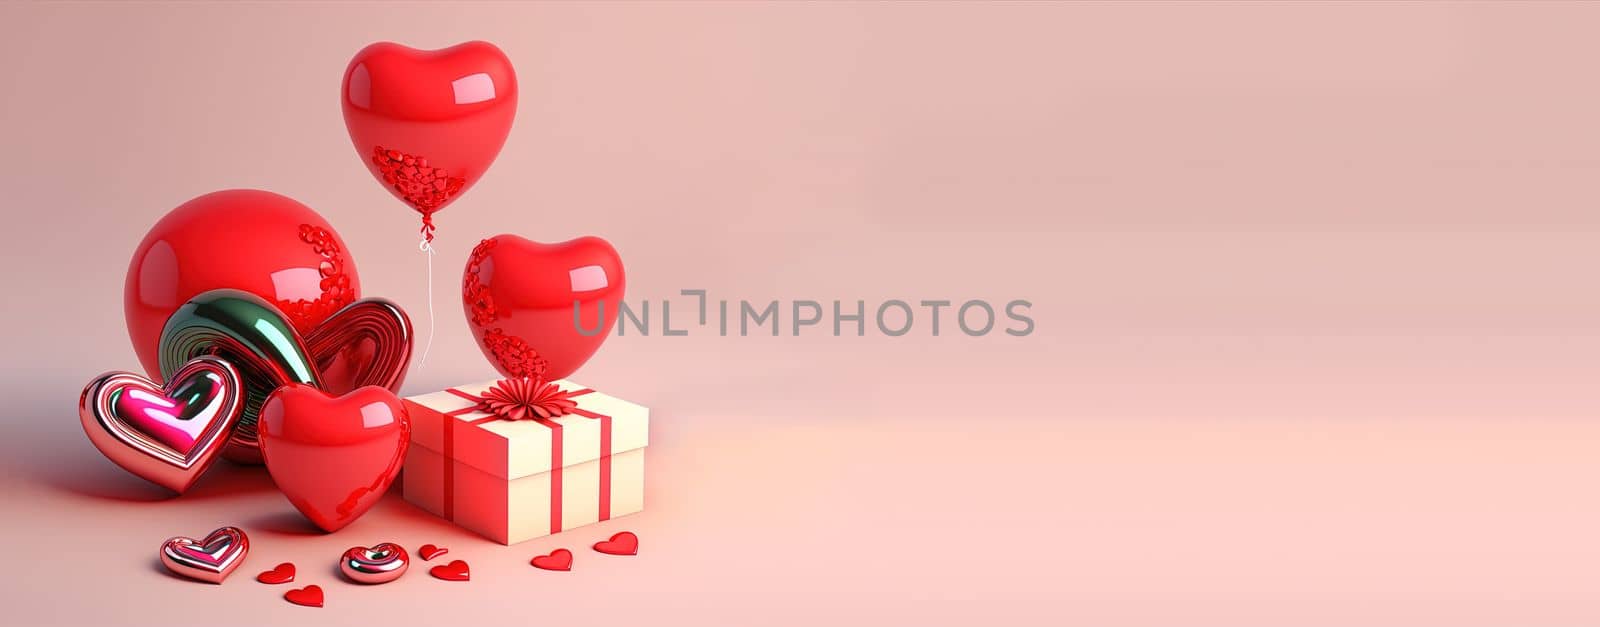 "Valentine's Day background with a radiant red 3D heart by templator